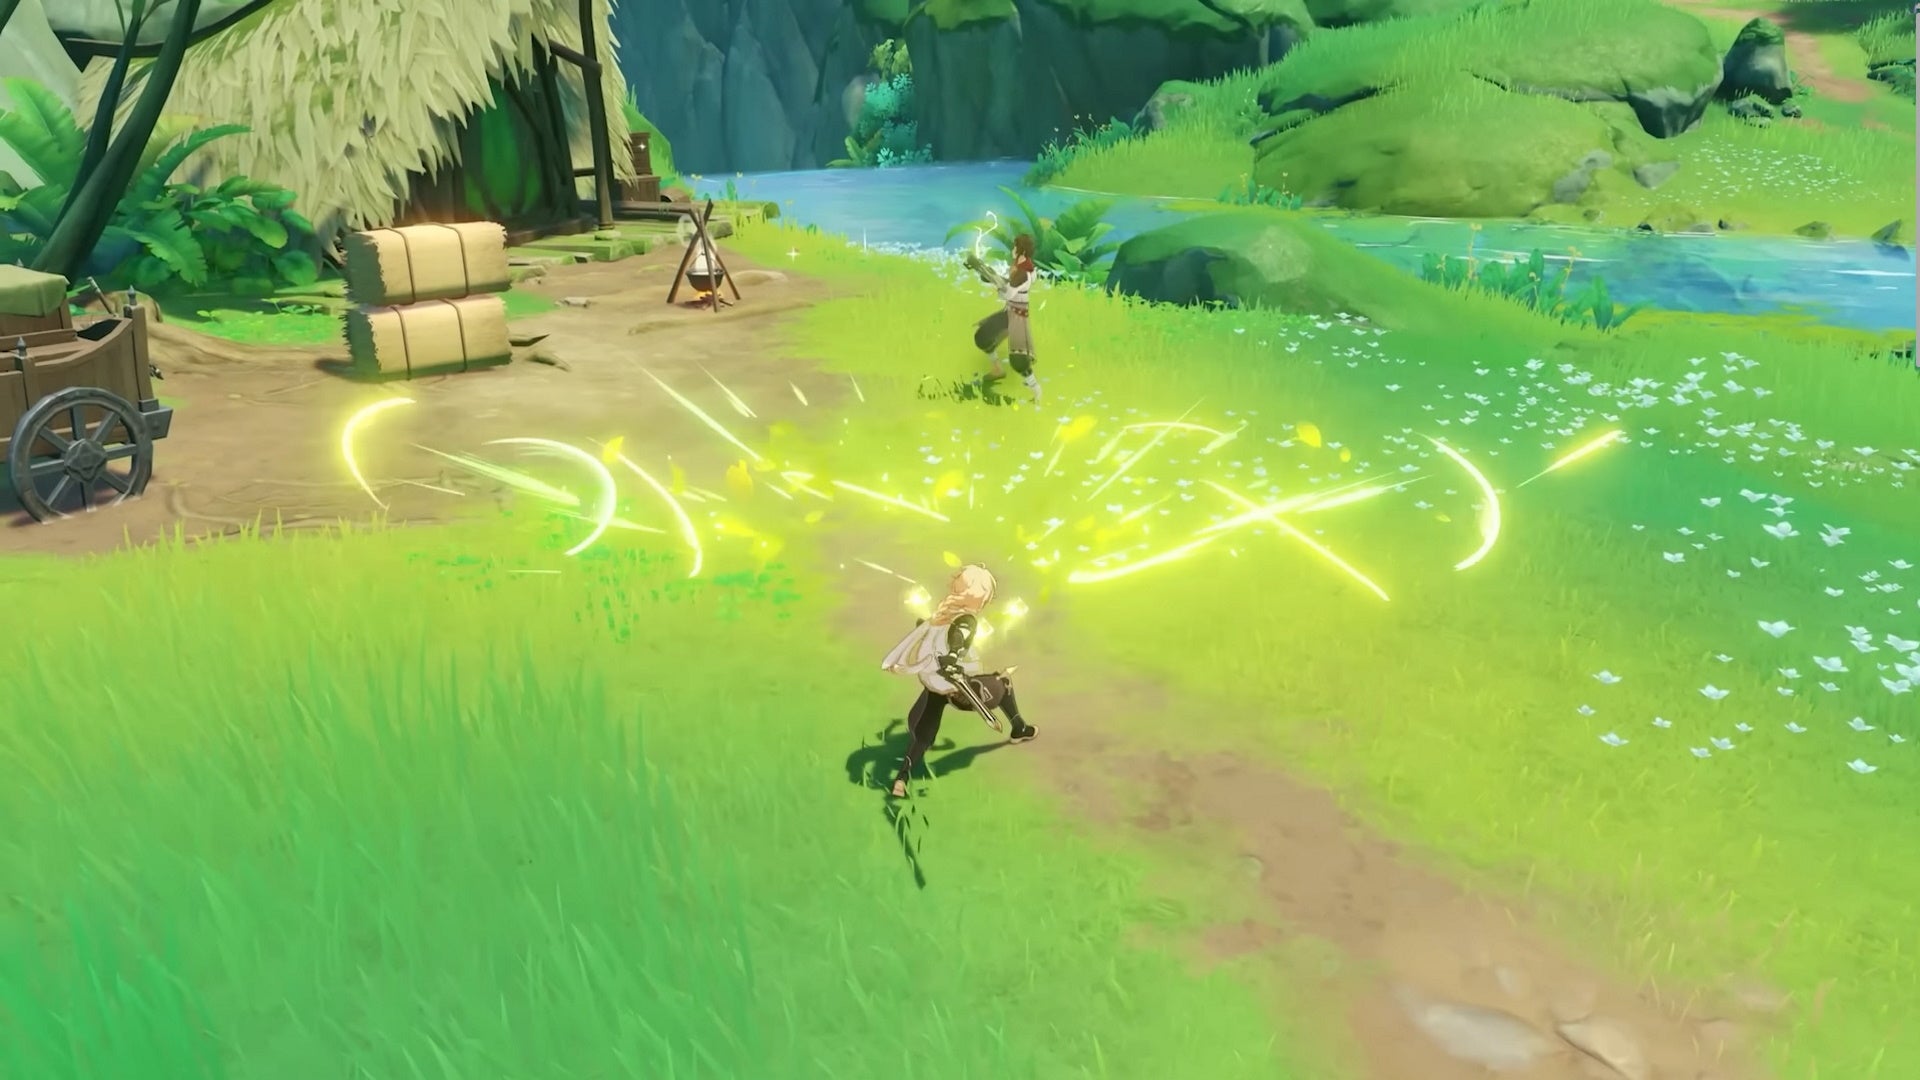 Dendro Traveler build: The Traveler fires a spray of leaves at a human enemy